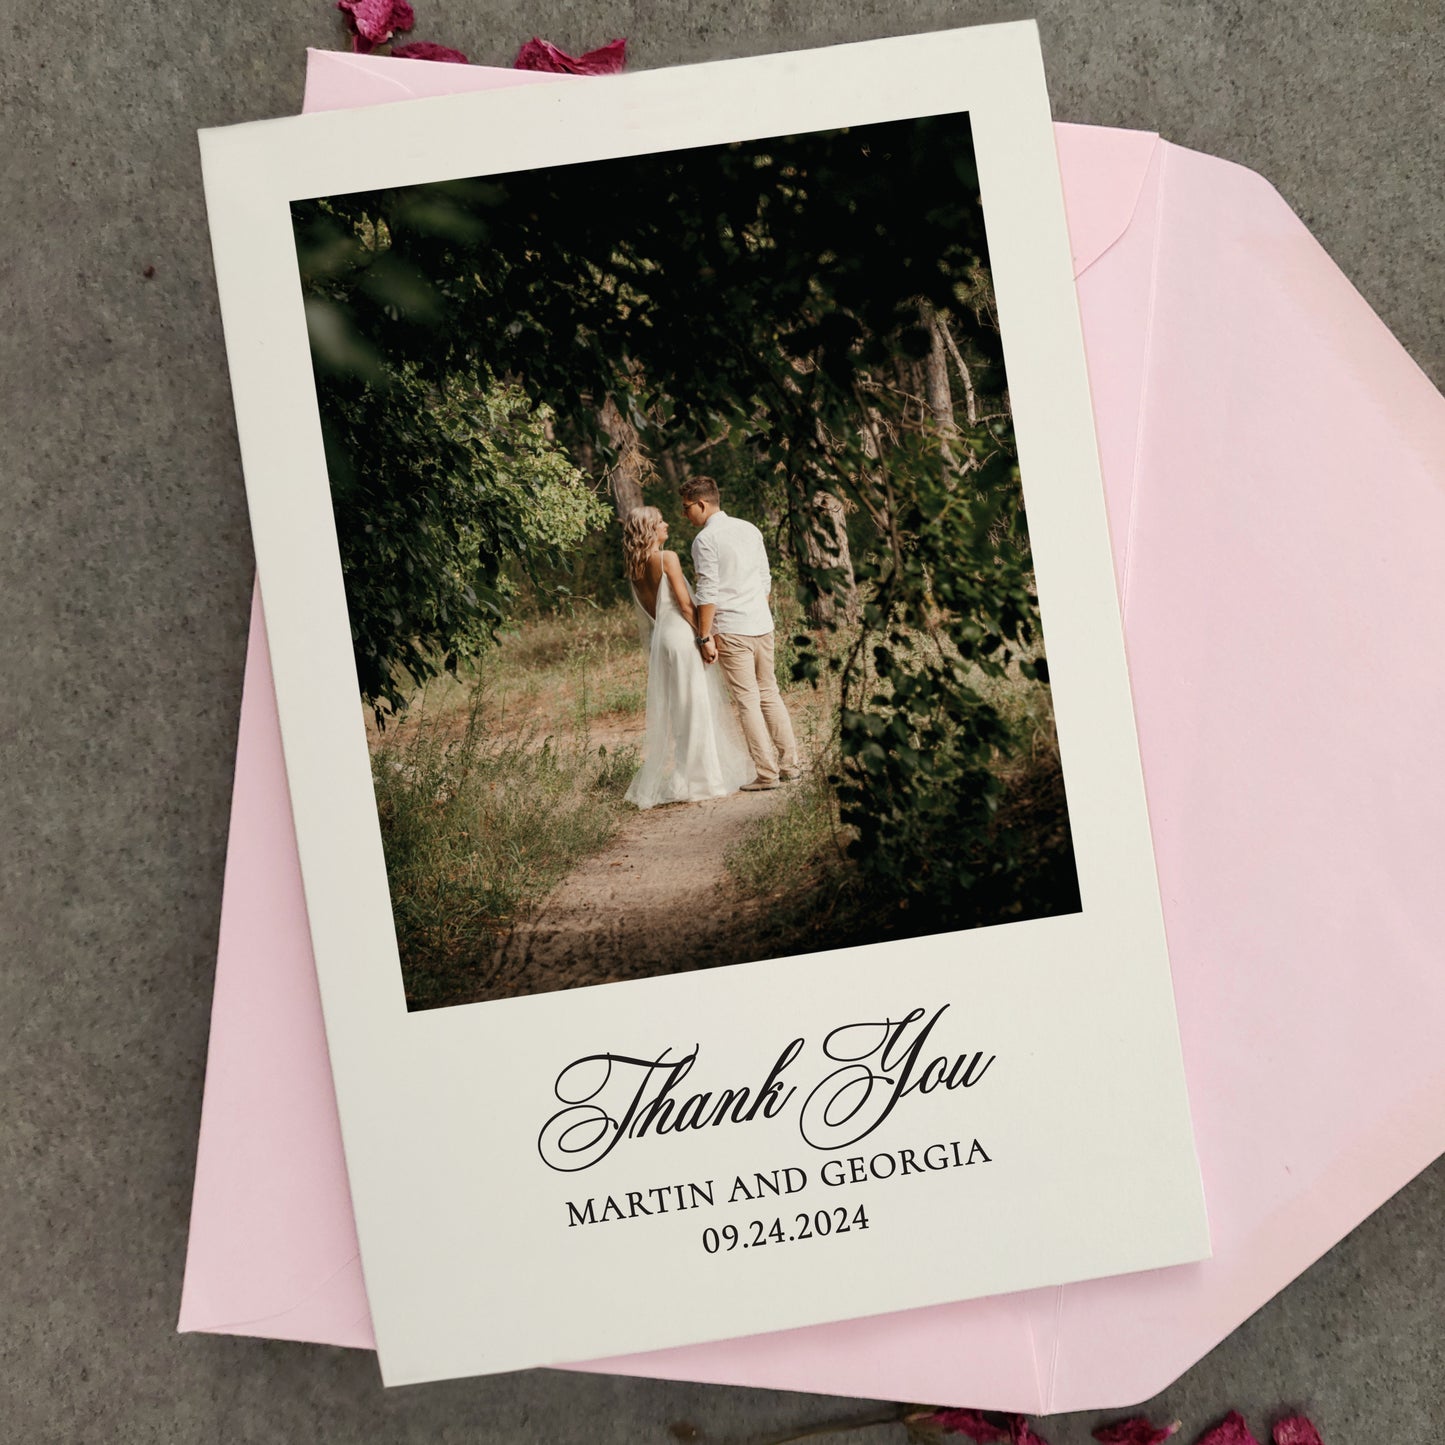 personalized wedding thank you cards with custom photo, names and wedding date with calligraphy font - XOXOKristen